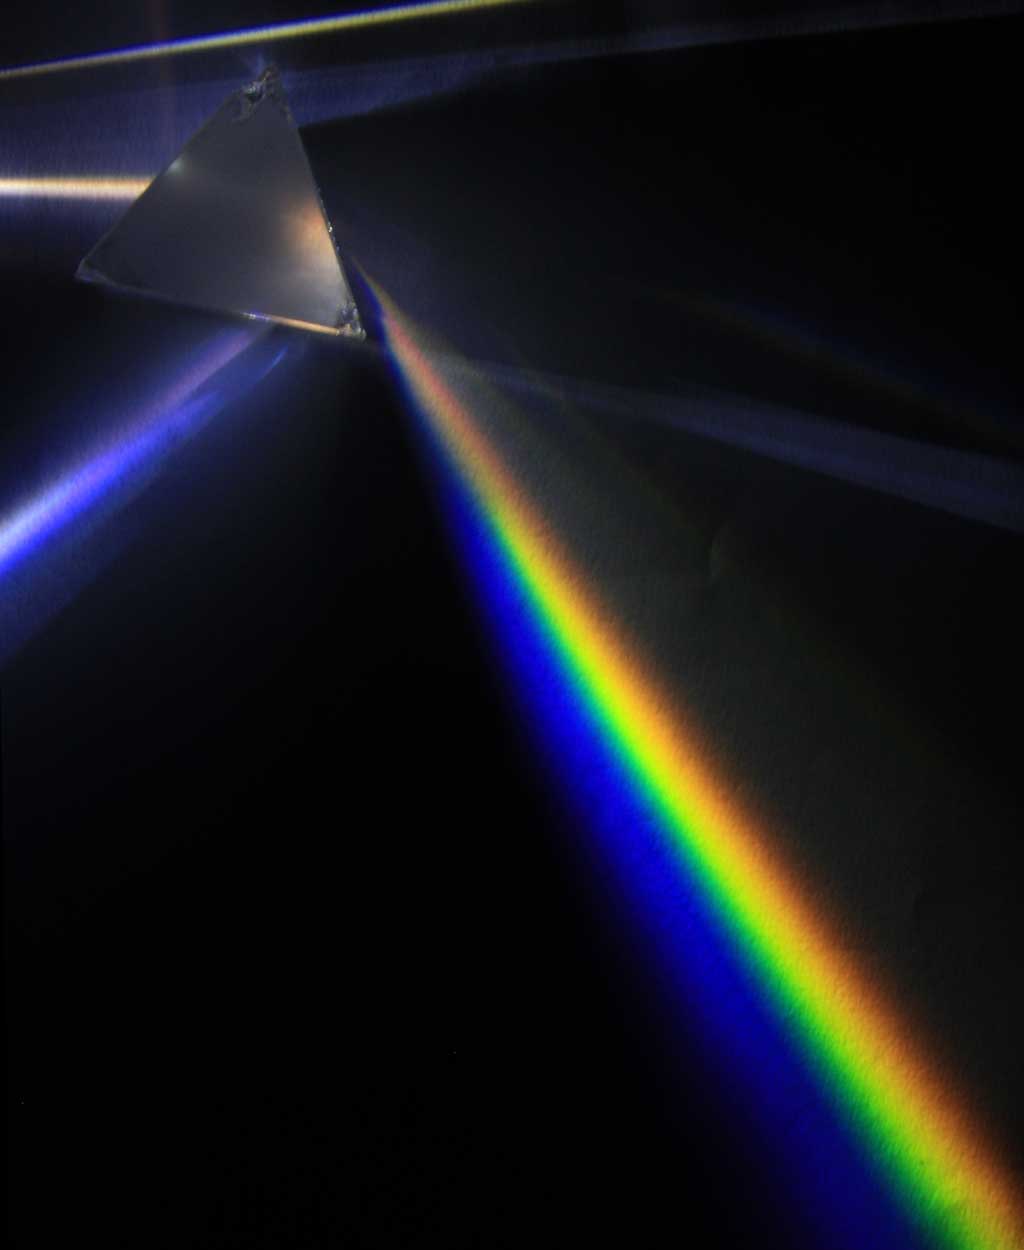 Light dispersion of a mercury-vapor lamp with a prism made of flint glass.